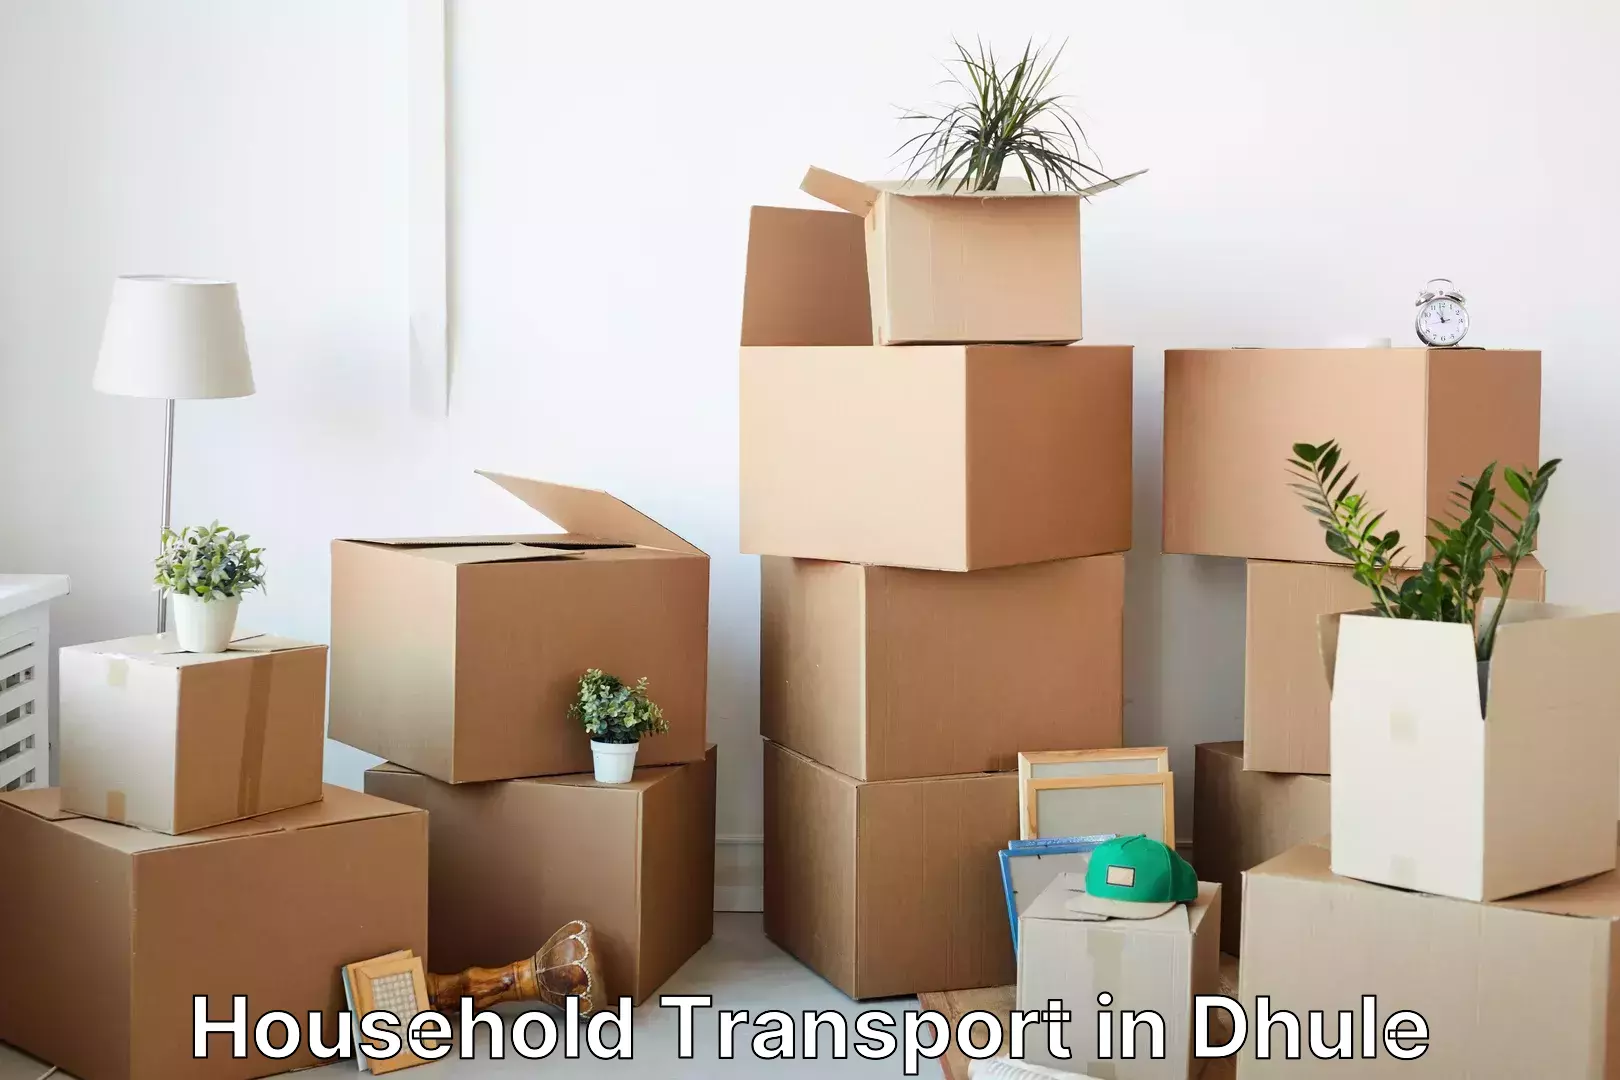 Furniture transport solutions in Dhule